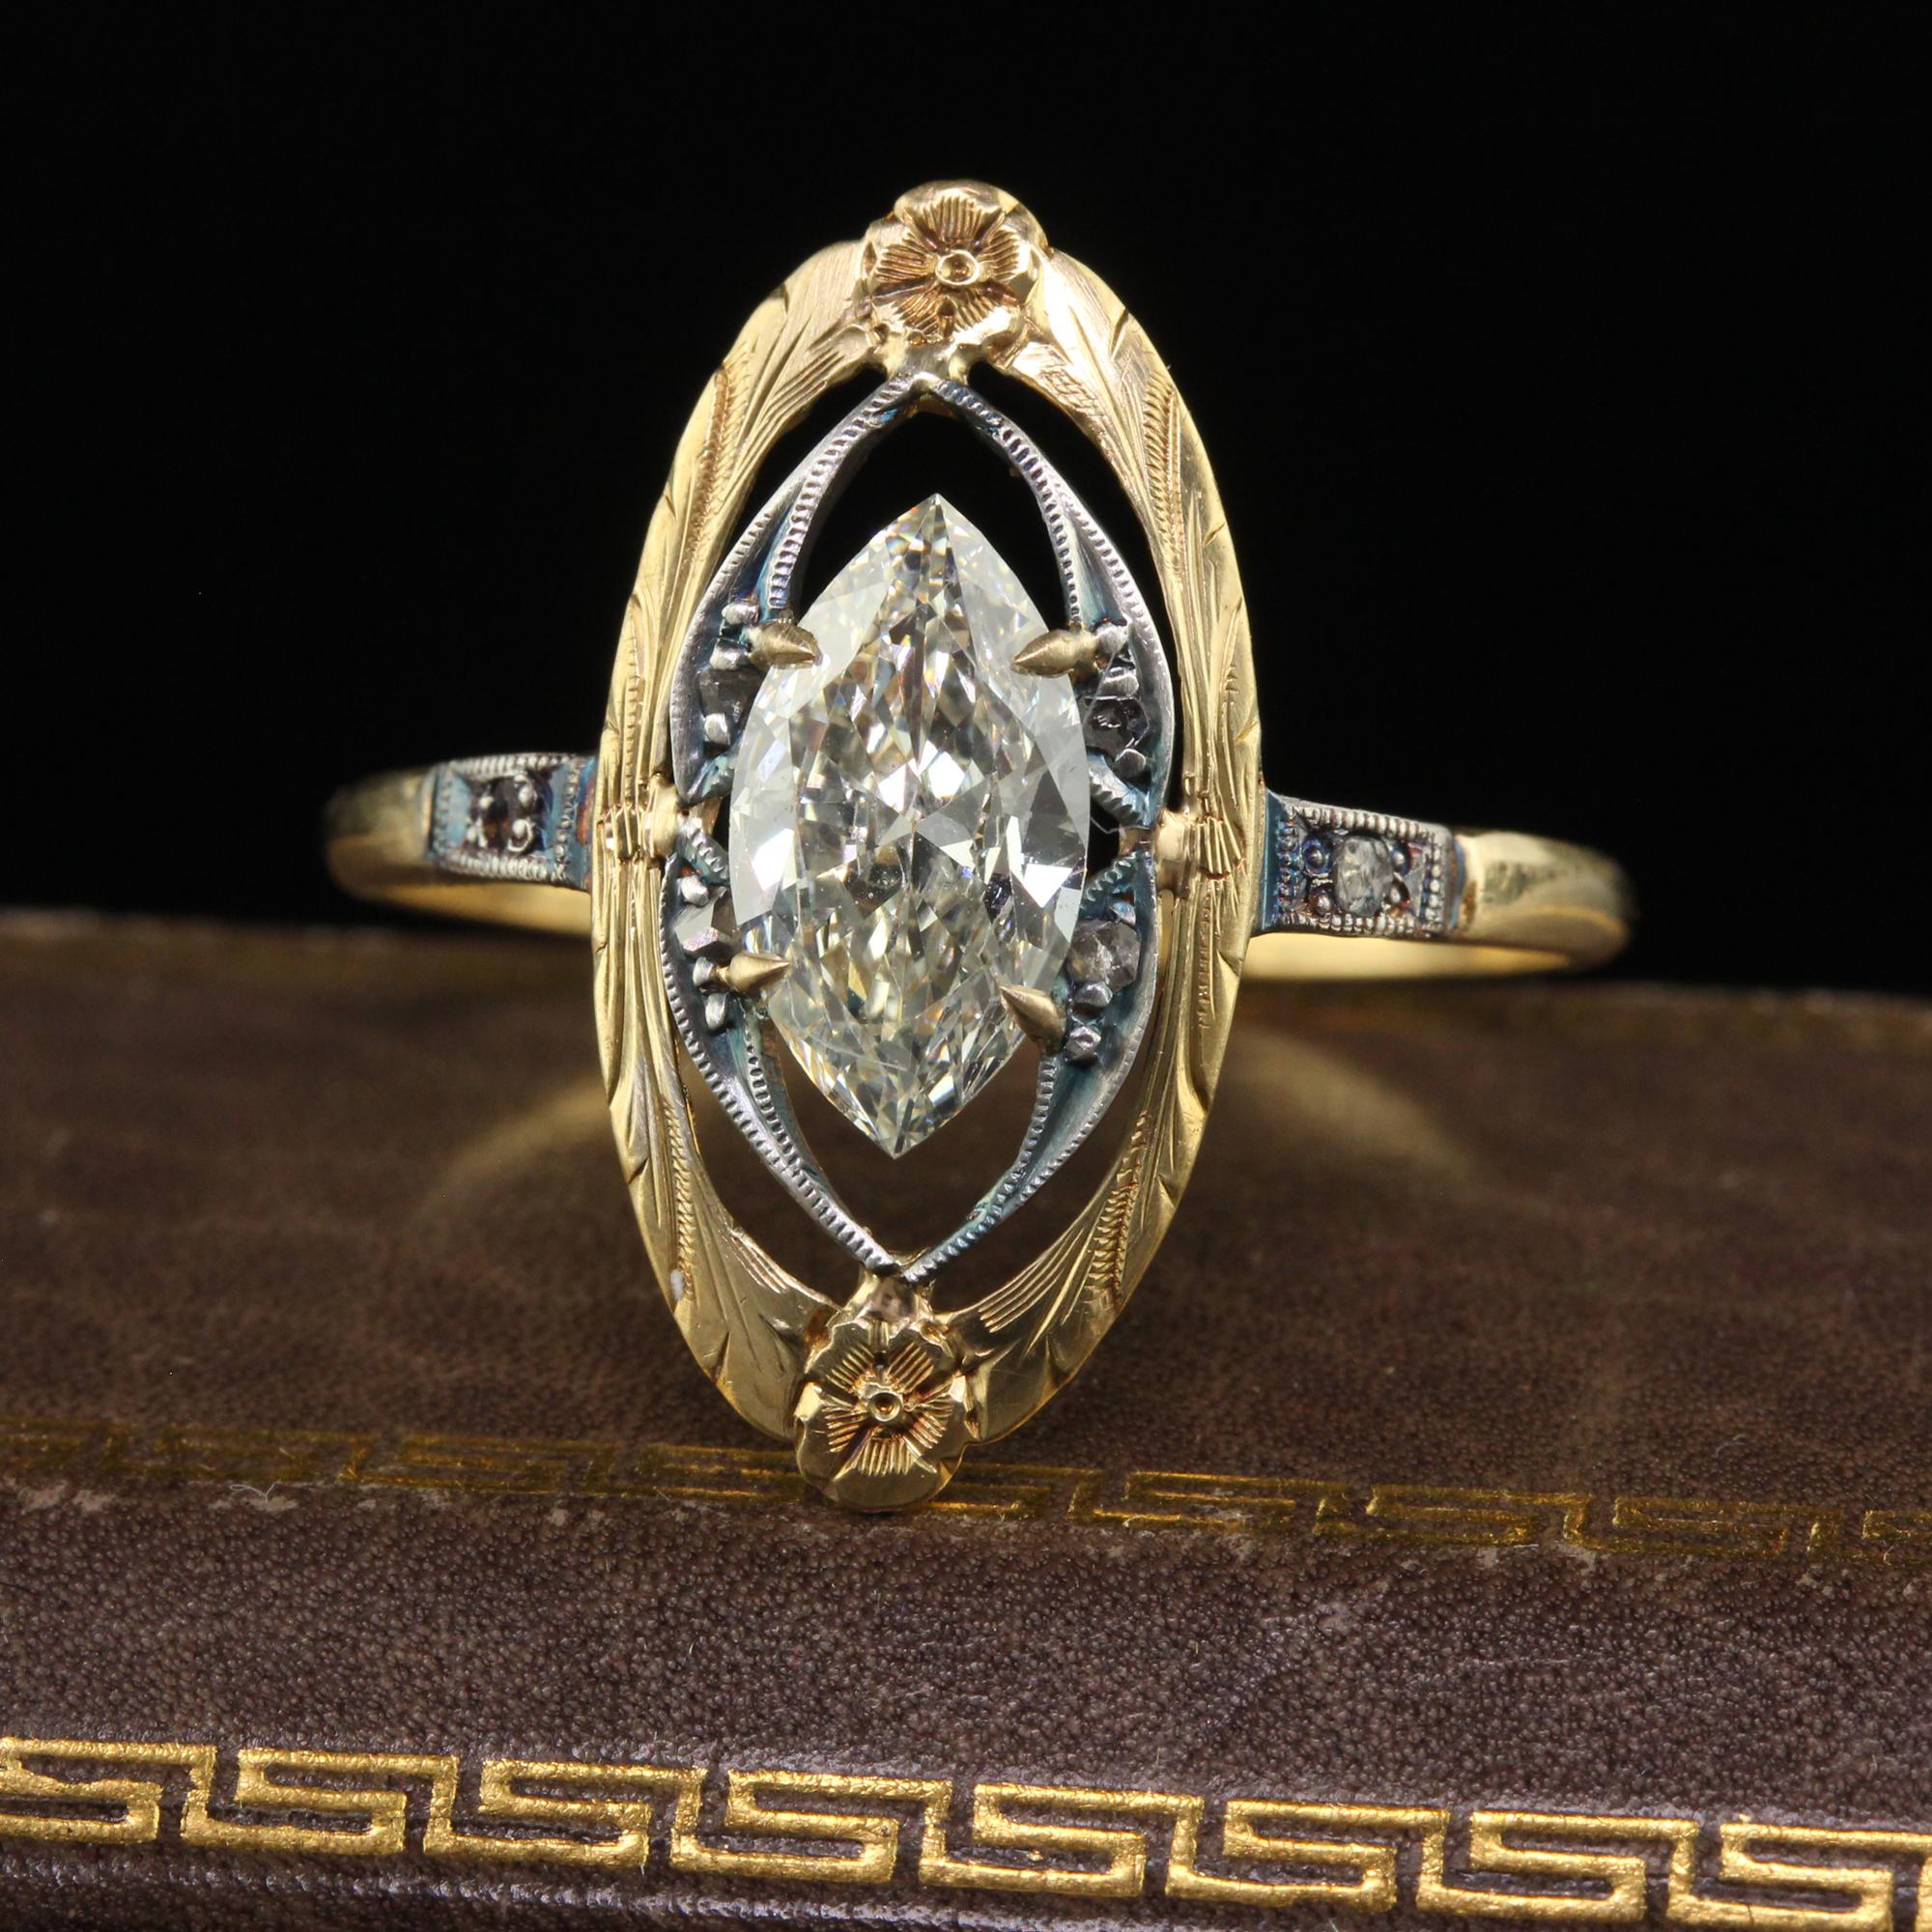 Beautiful Antique Art Nouveau 18K Yellow Gold Old Cut Marquise Engagement Ring - GIA. This gorgeous art nouveau engagement ring is crafted in 18k yellow gold and silver top on some elements. The center holds an old cut marquise cut diamond that has